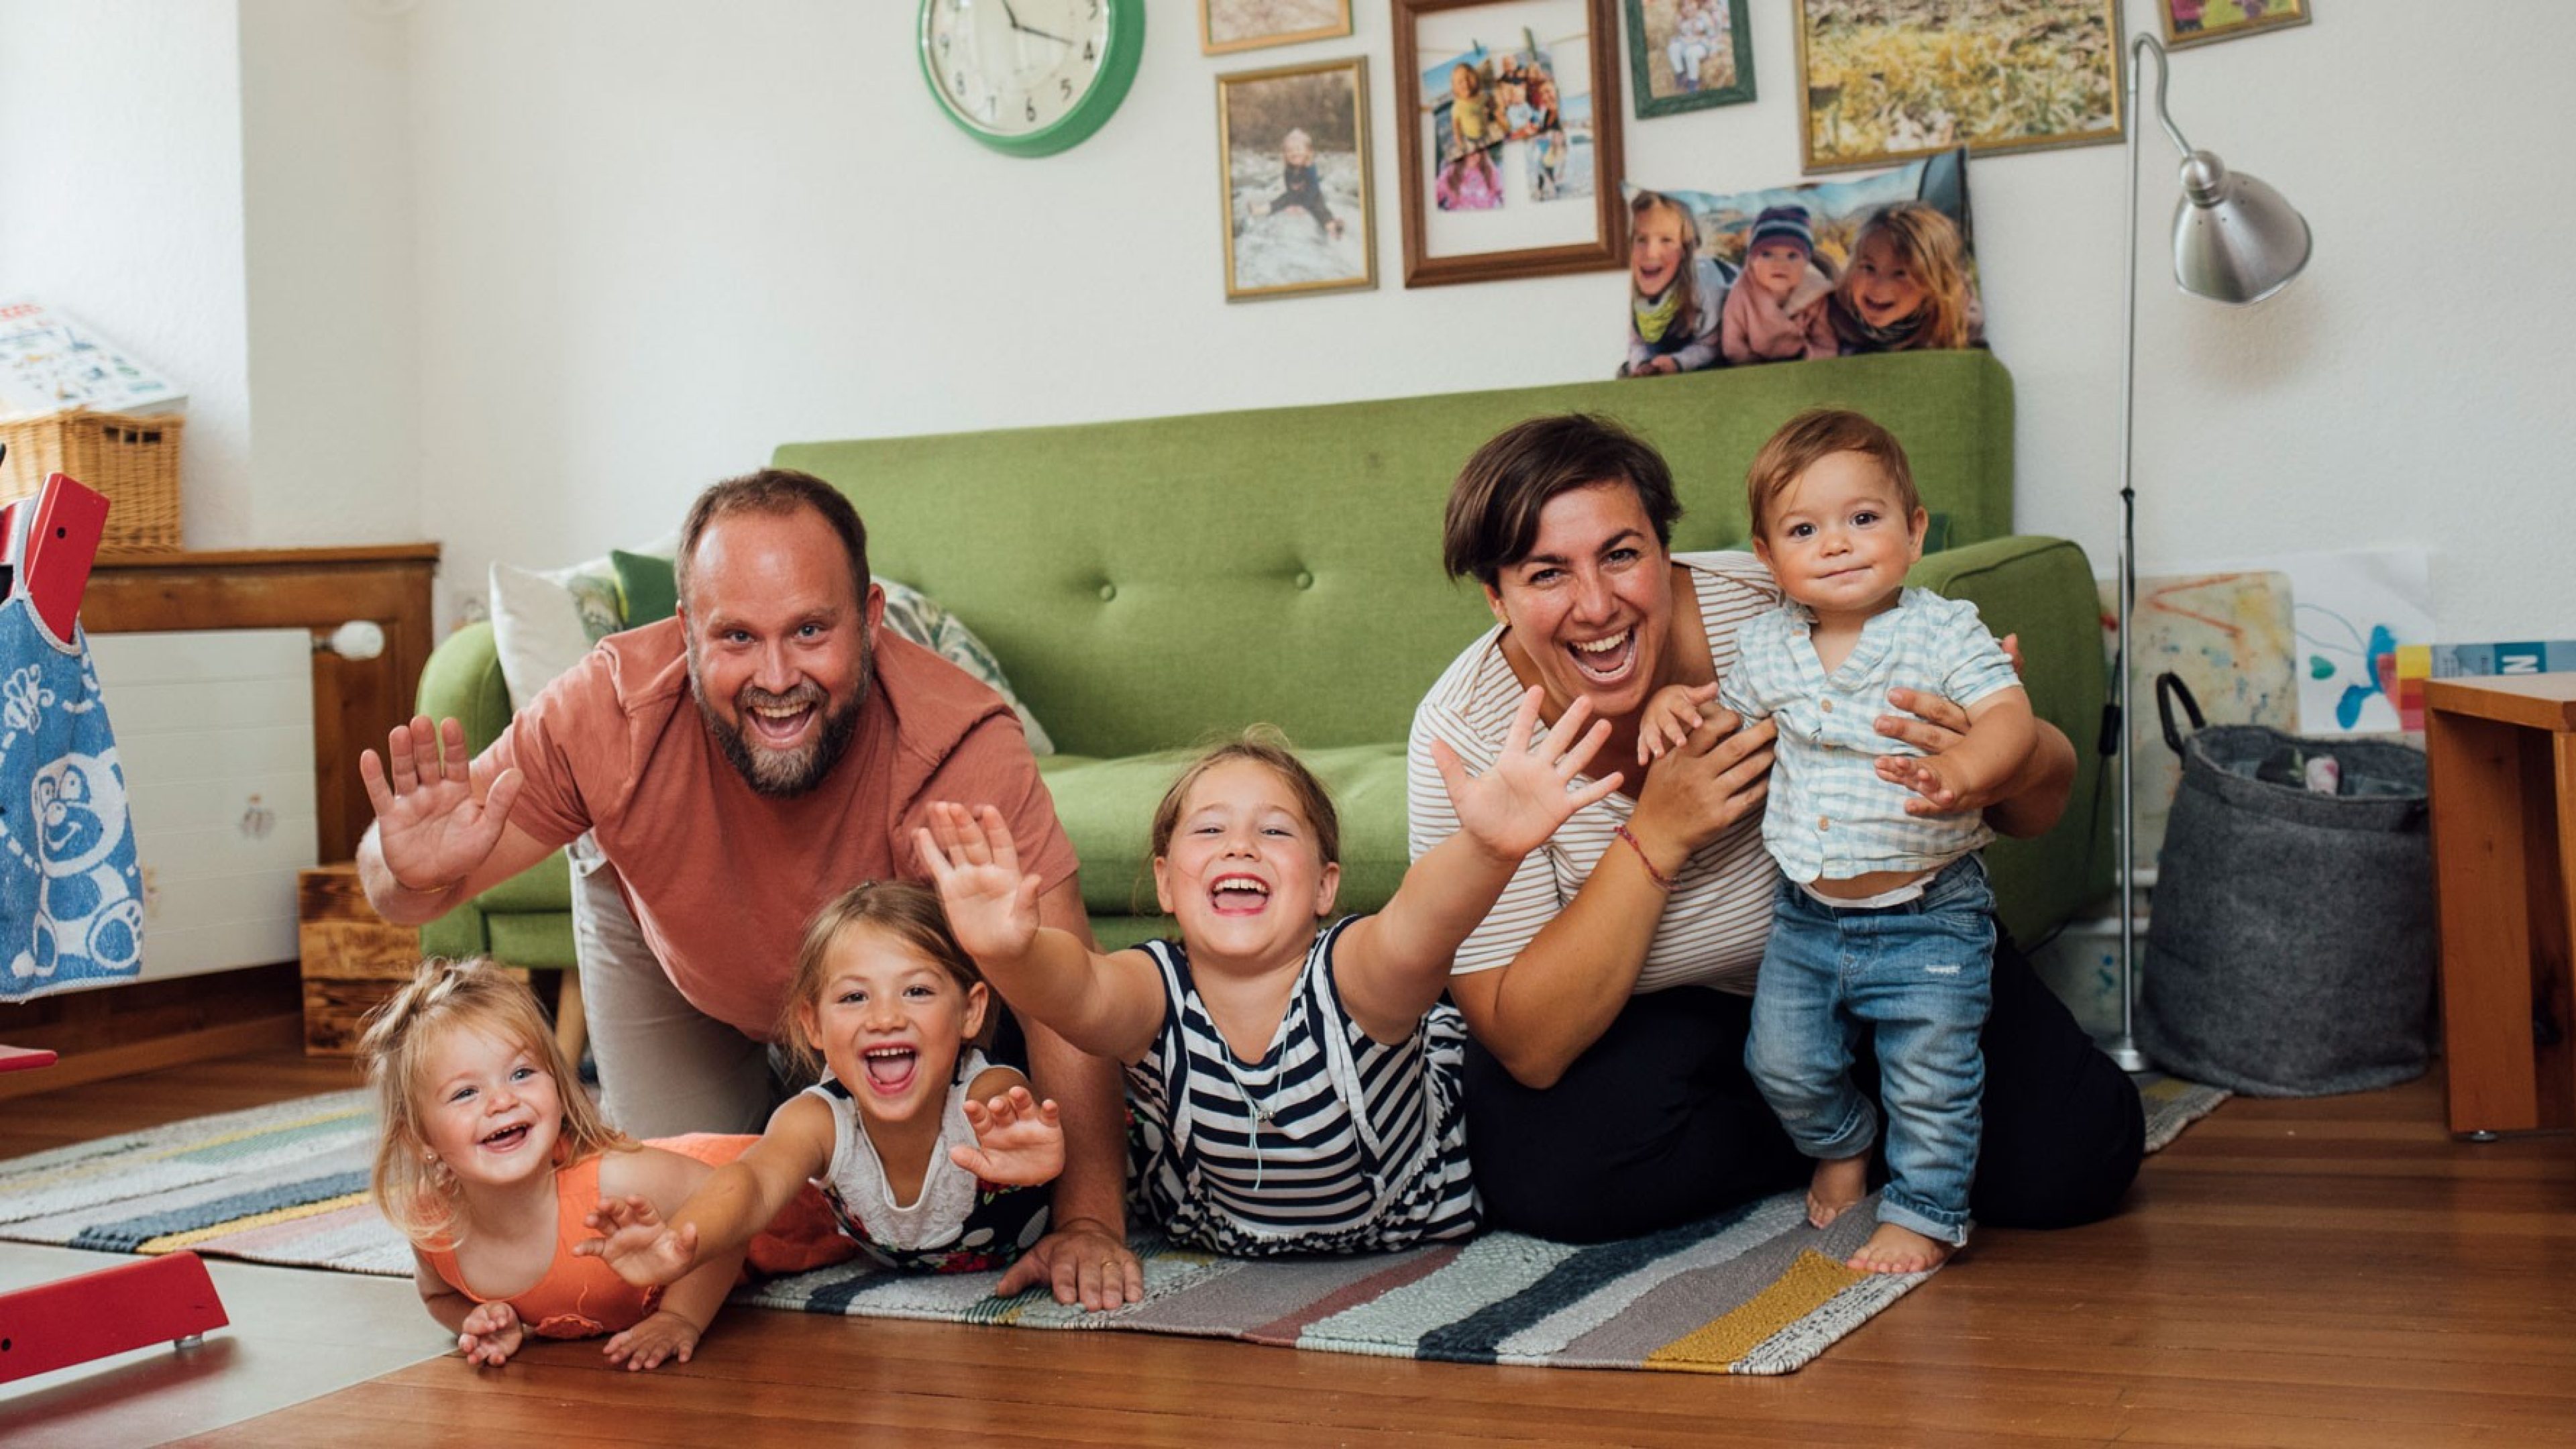 Parents with children laughing in a living room with a green sofa and pictures on the wall